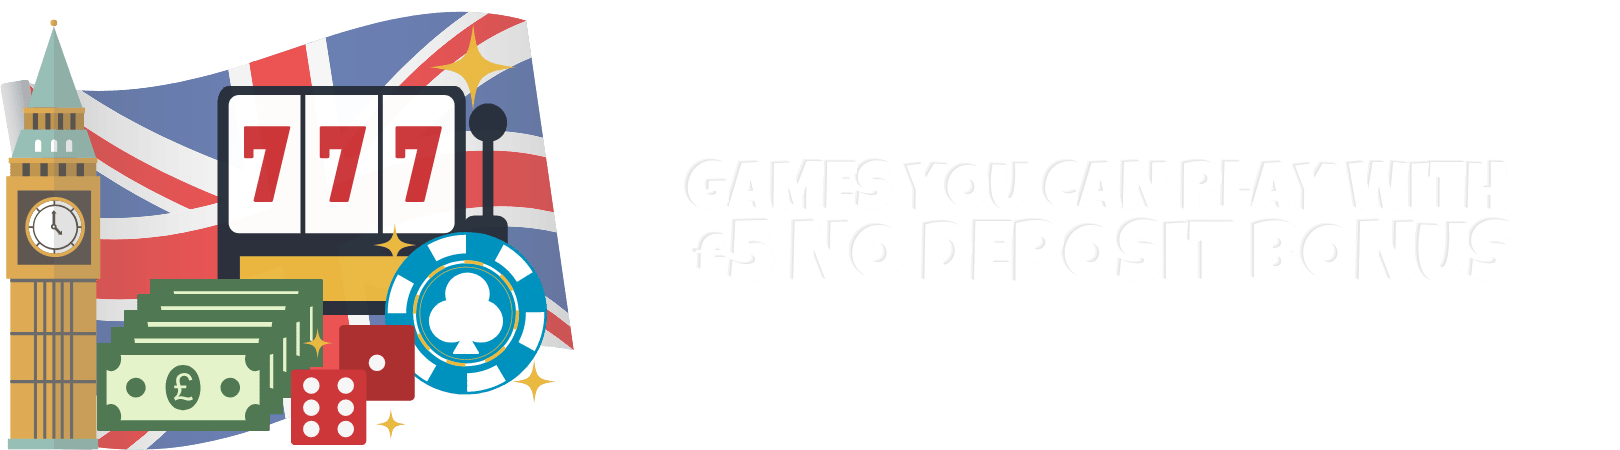 games you can play with 5 no deposit bonus img